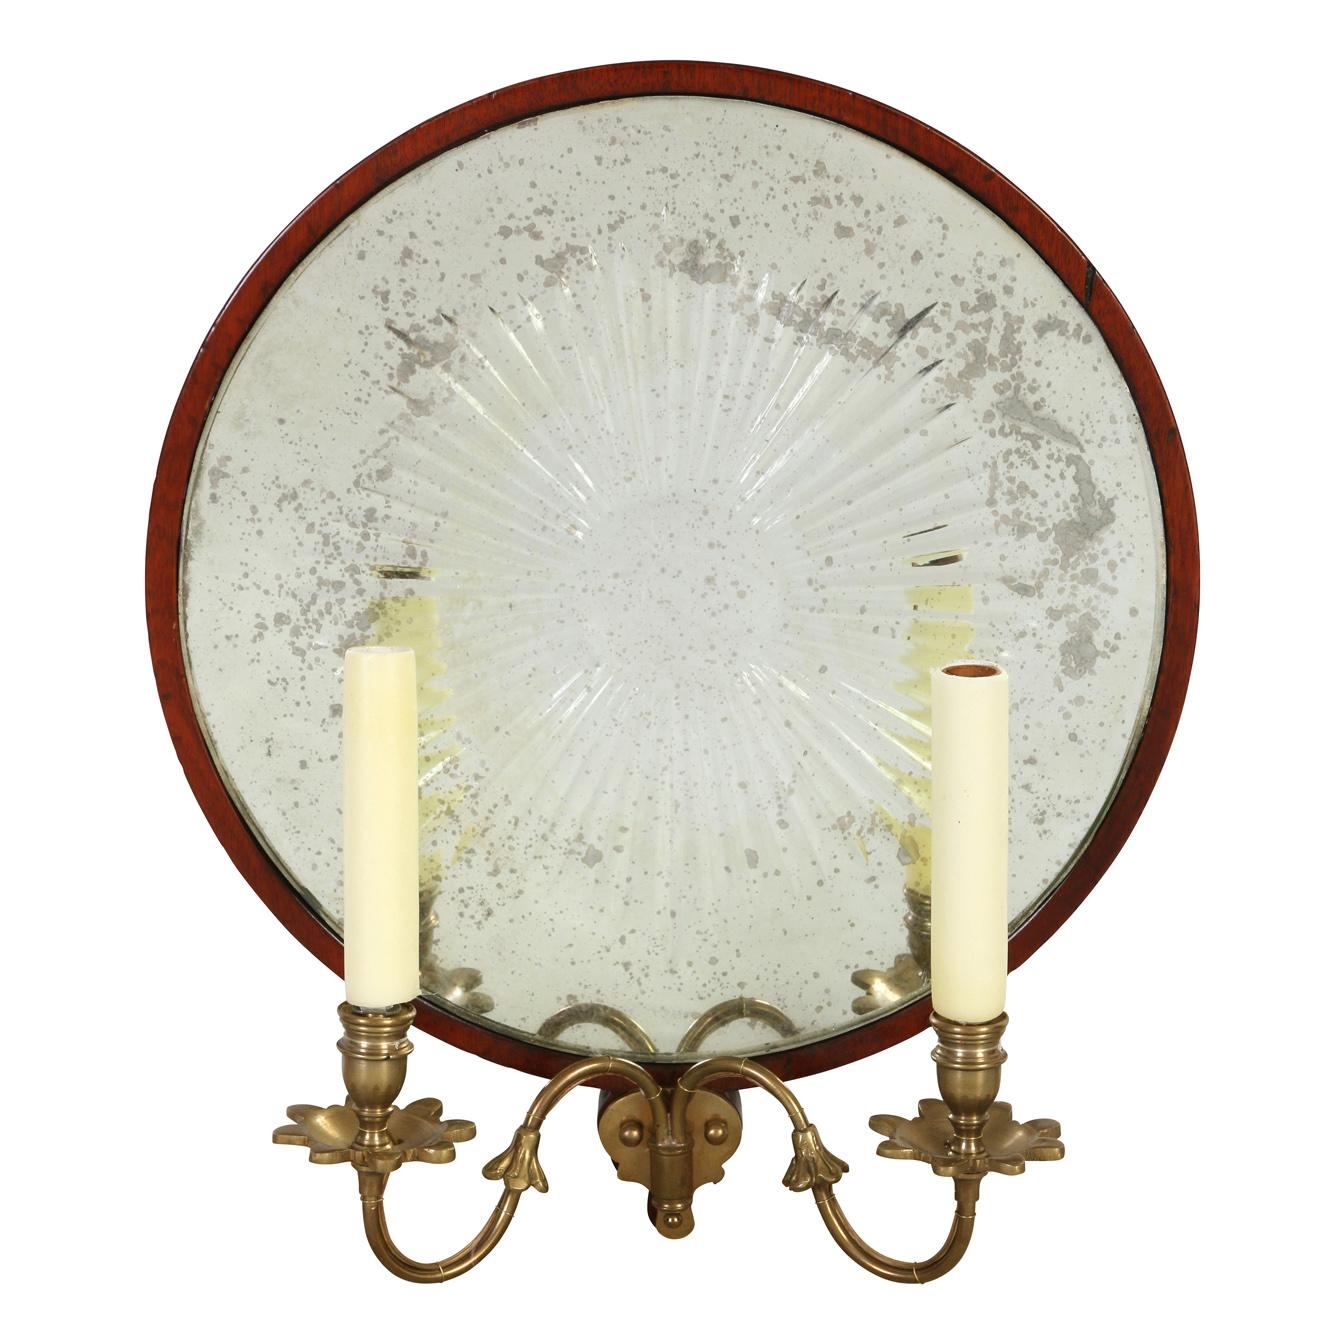 A pair of round double arm brass wall sconces with antiqued mirror backs that have a starburst design.